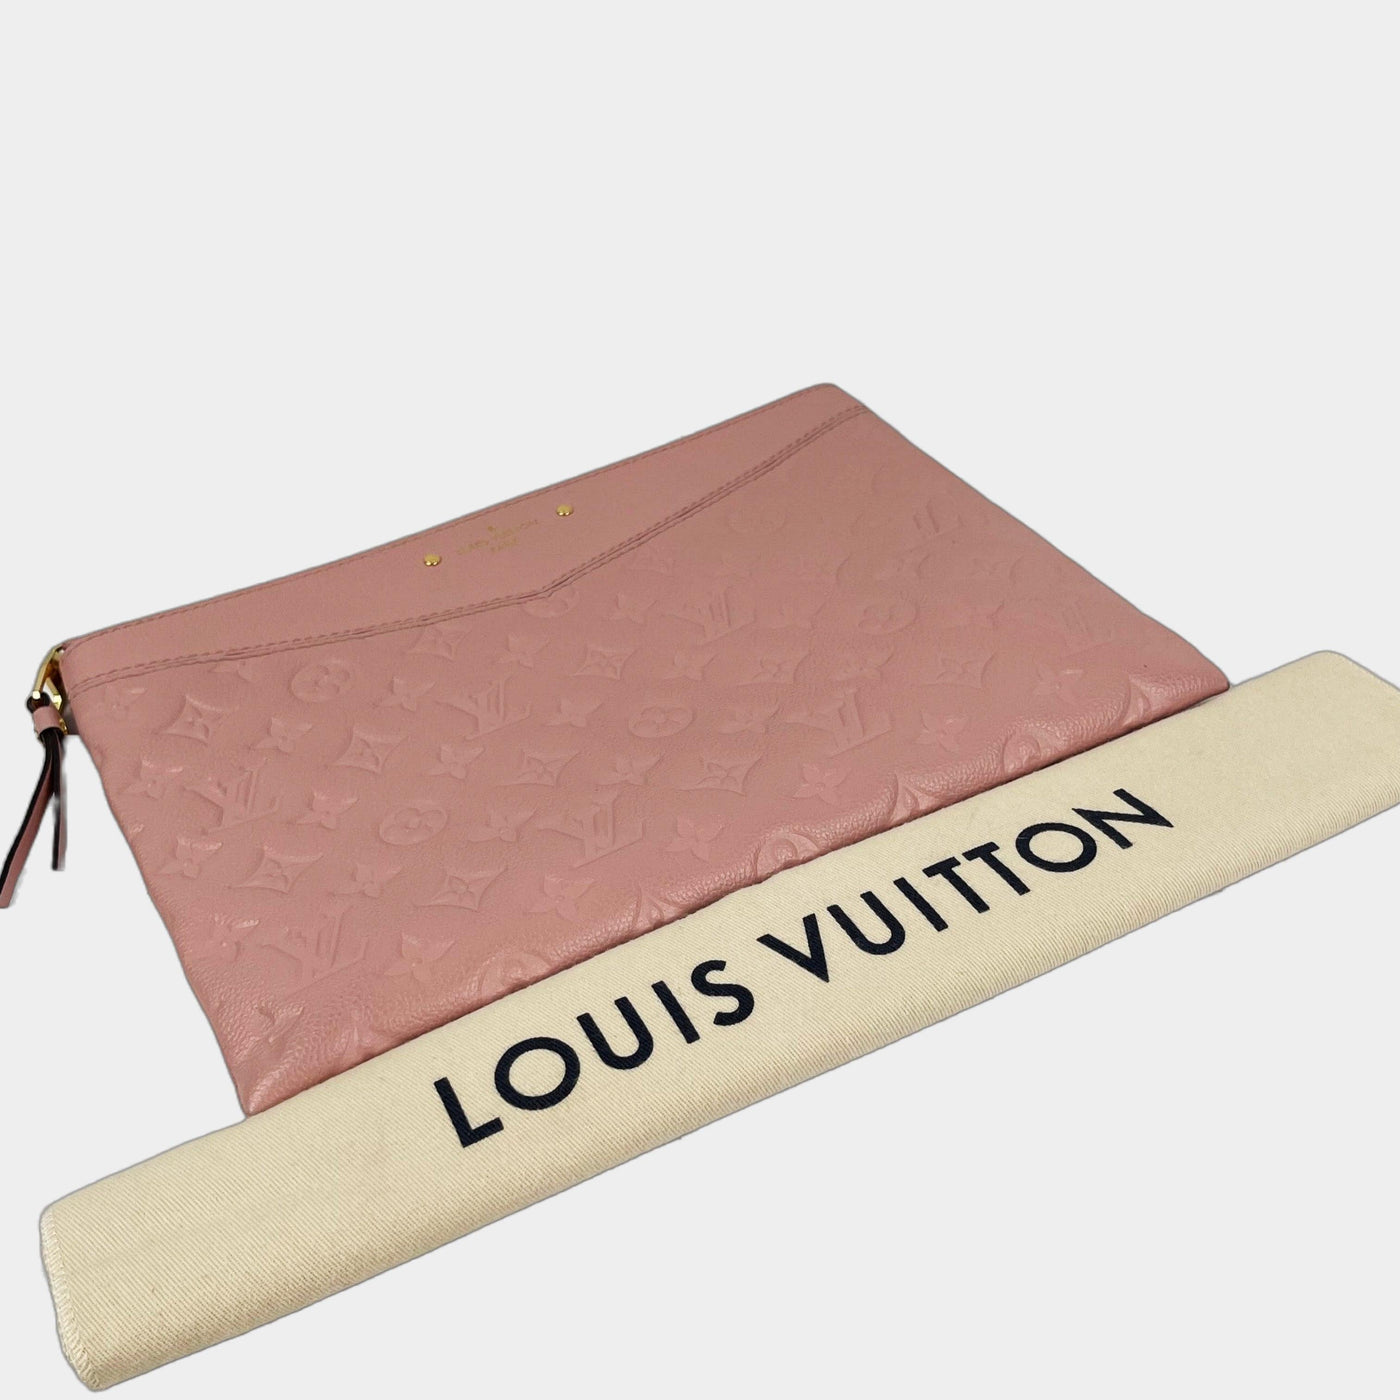 Louis Vuitton Daily Pouch Review 